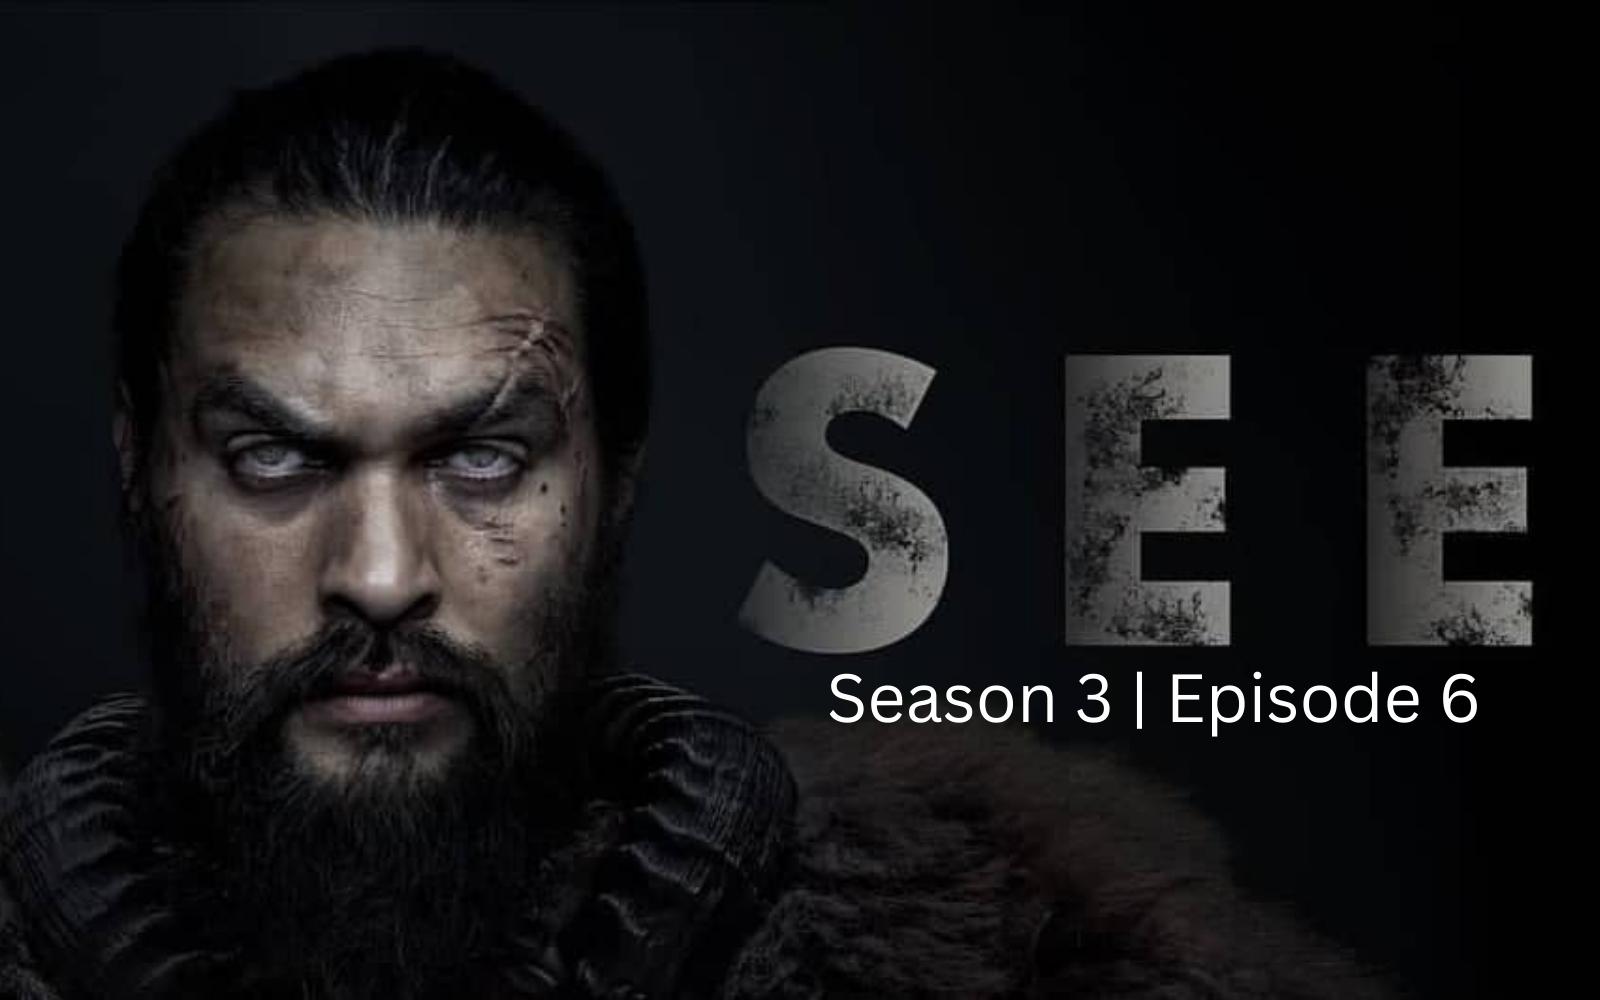 See Season 3 Episode 6 : Release Date, Release Time, Countdown, Spoiler, Teaser & Reviews